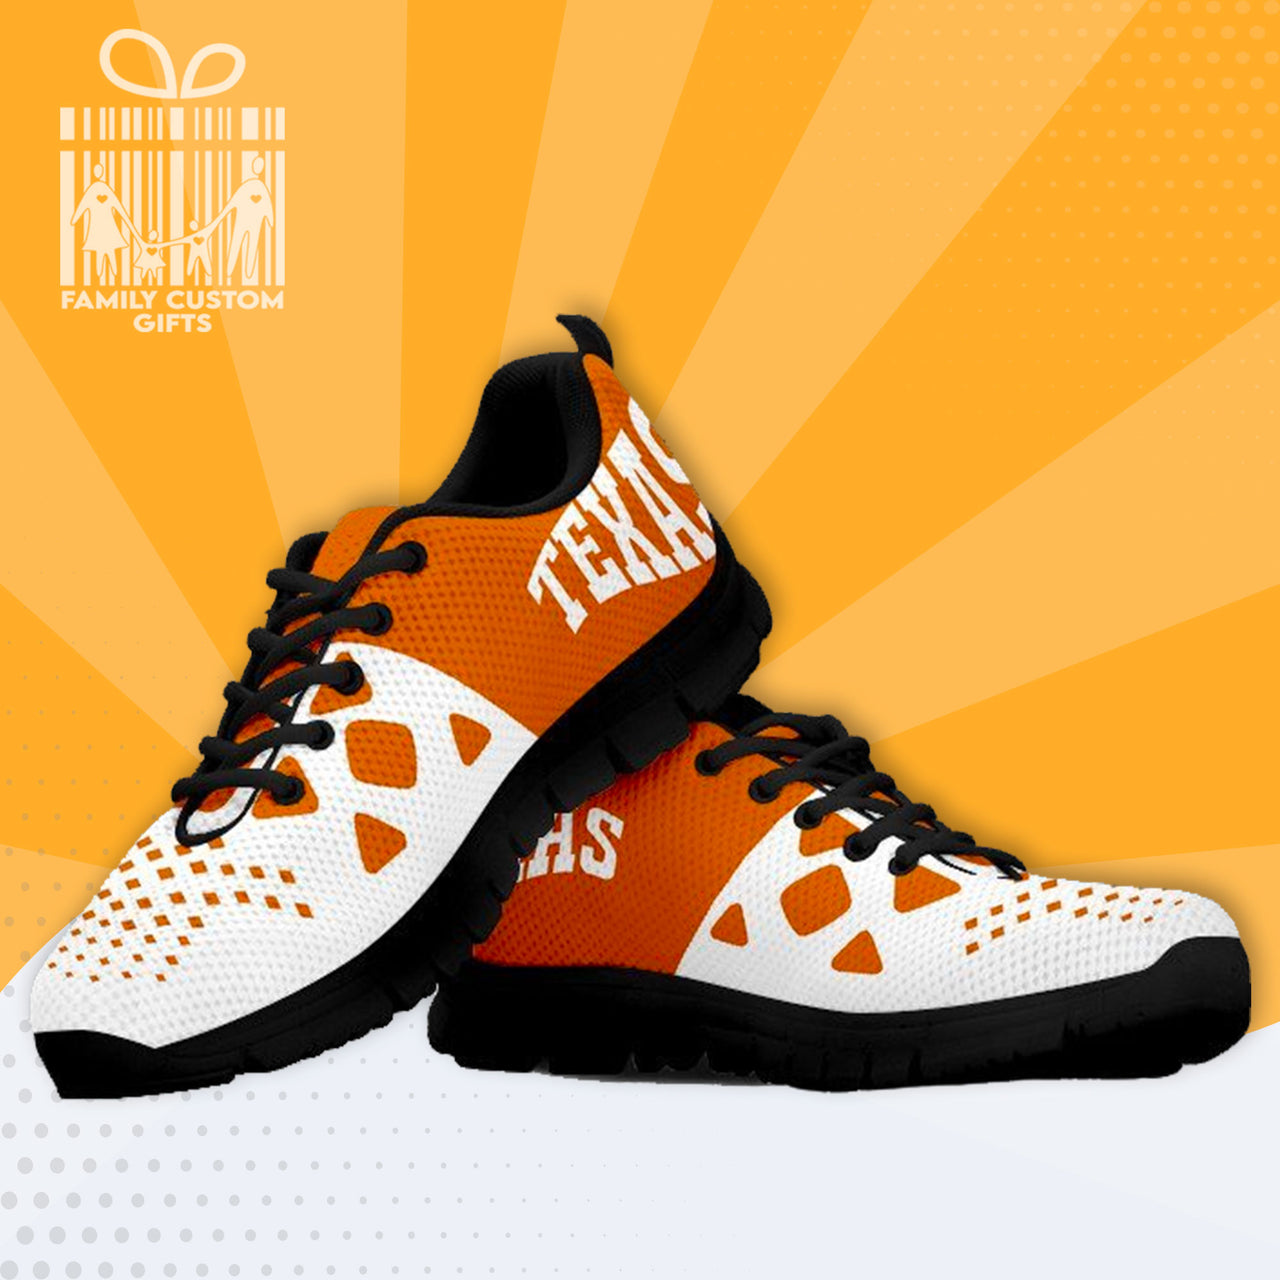 Texas Custom Shoes for Men Women 3D Print Fashion Sneaker Gifts for Her Him